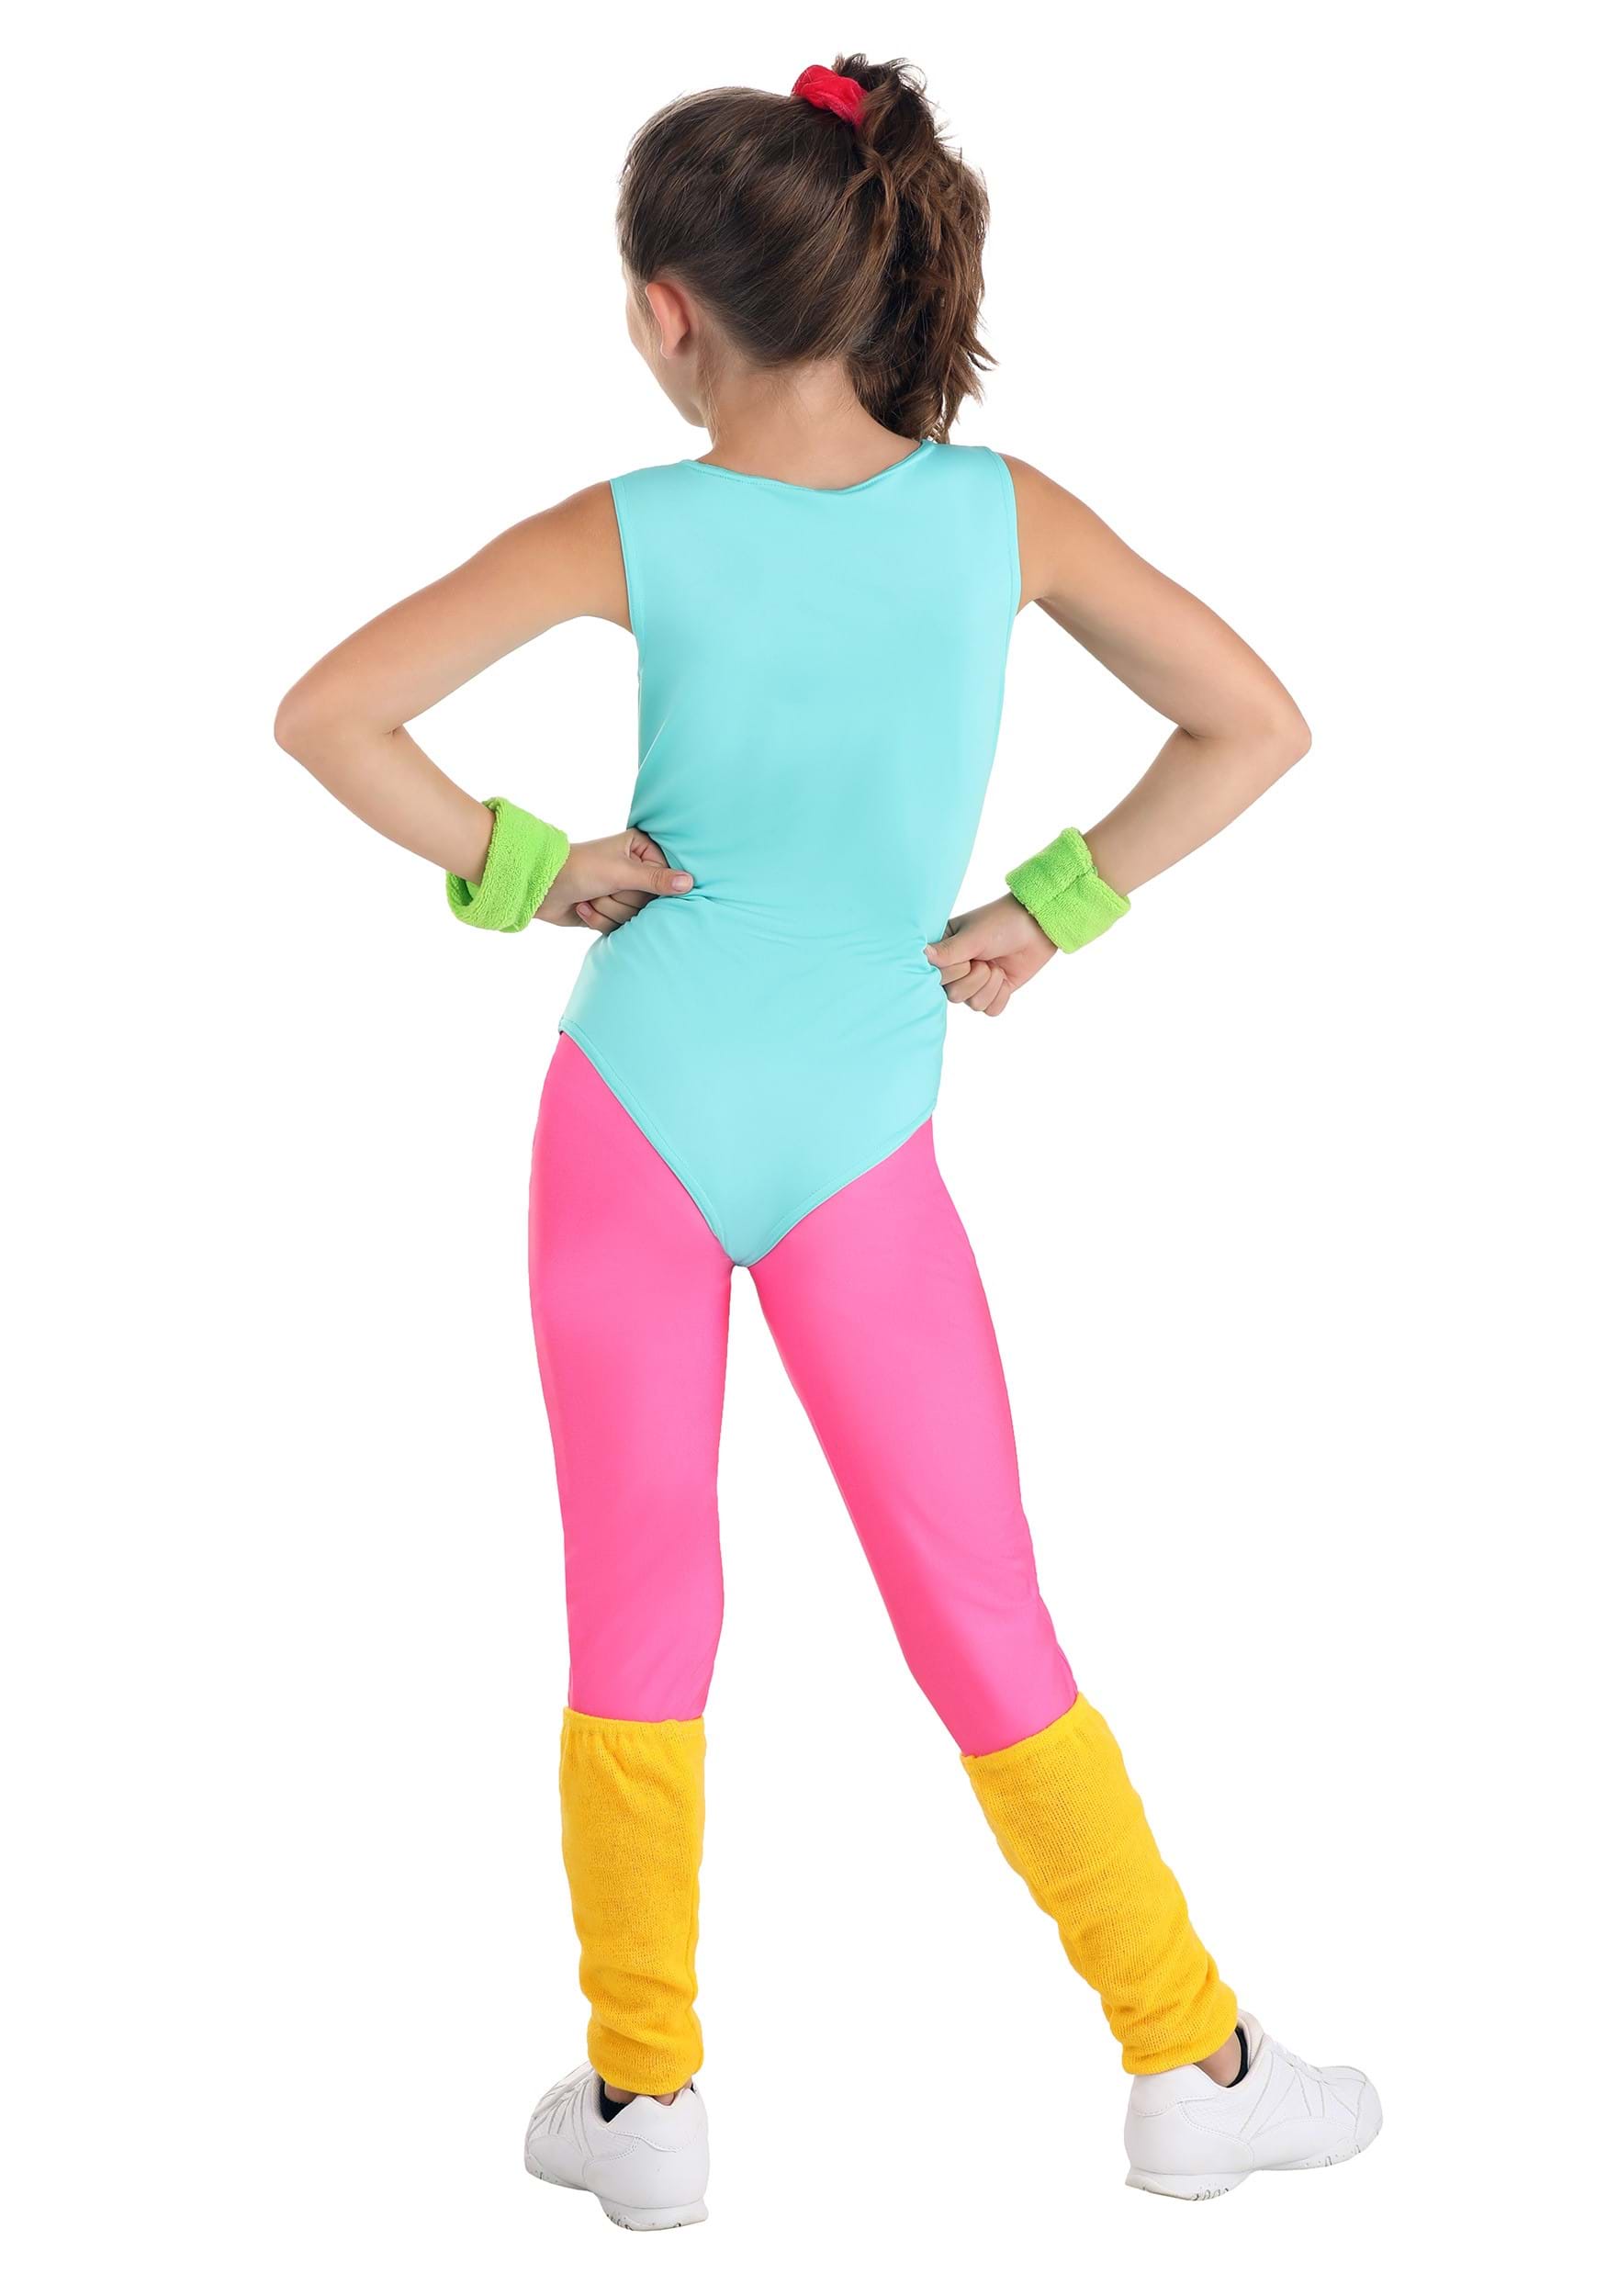 80s Women's Workout Costume